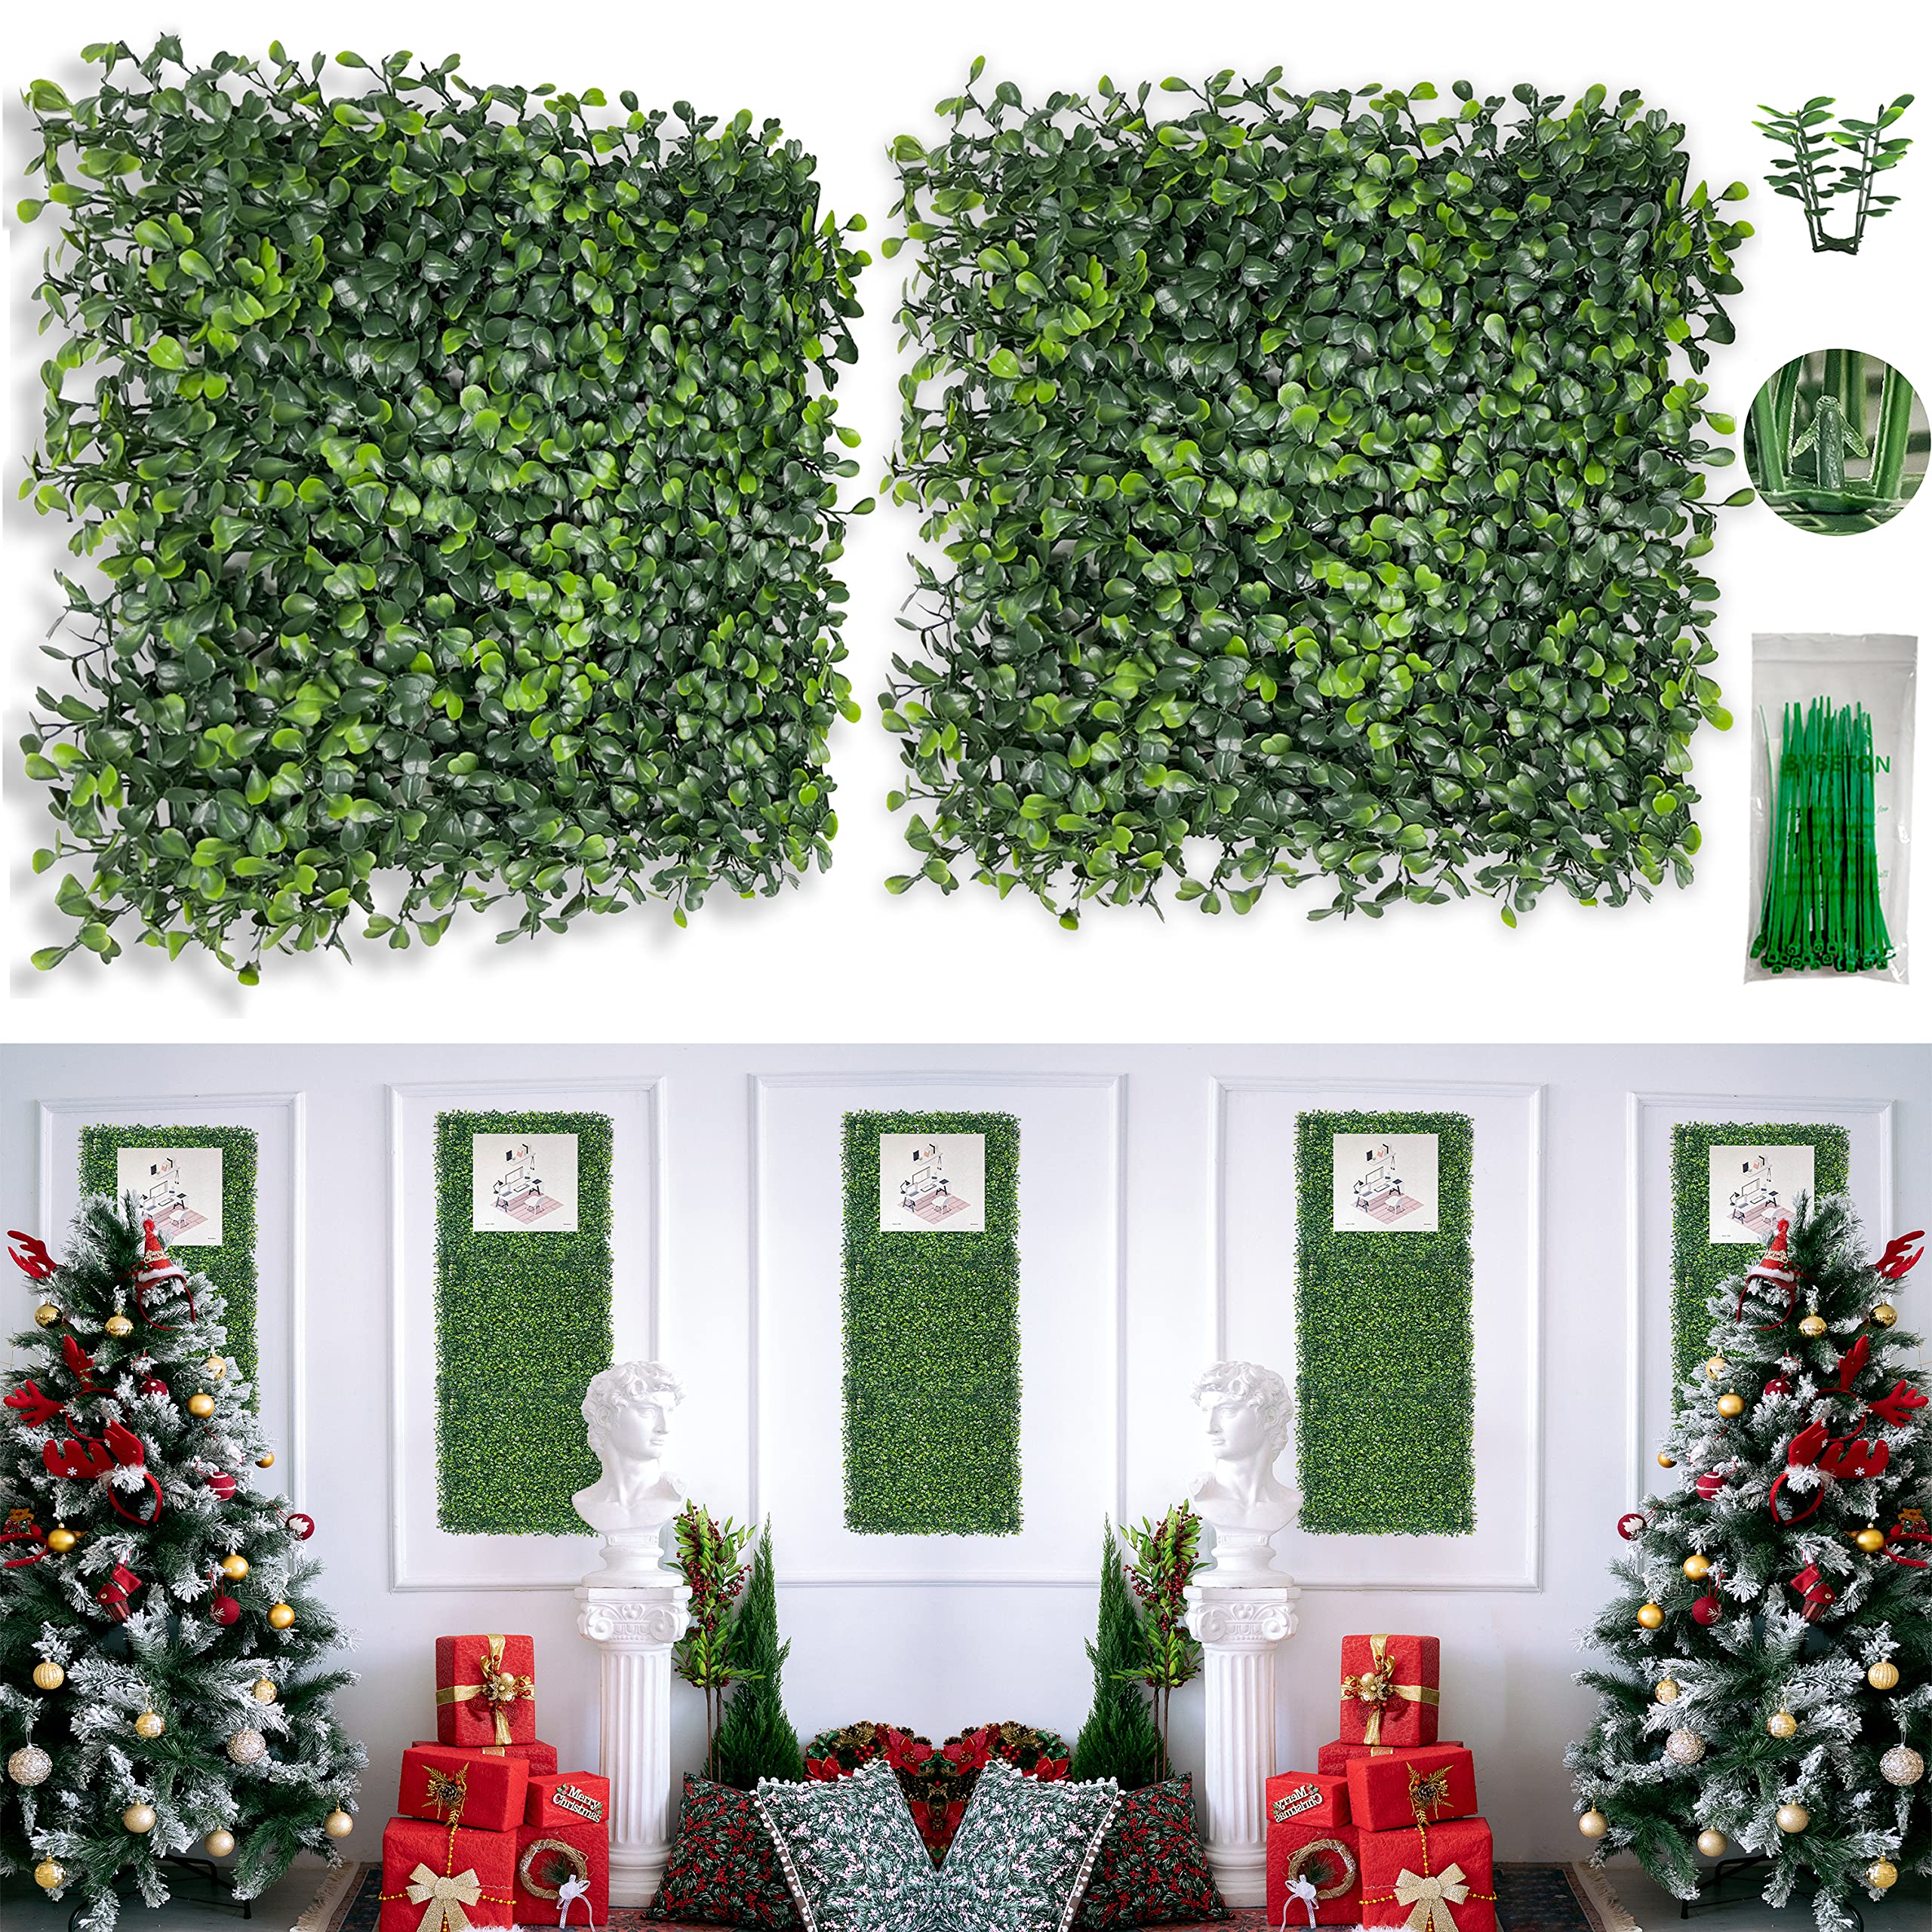 Bybeton Artificial Grass Backdrop Wall,10"x 10"(16Pcs) UV-Anti Boxwood Hedge Topiary Wall Panels for Indoor Outdoor Privacy Protected and Garden,Balcony,Privacy Fence Screen décor